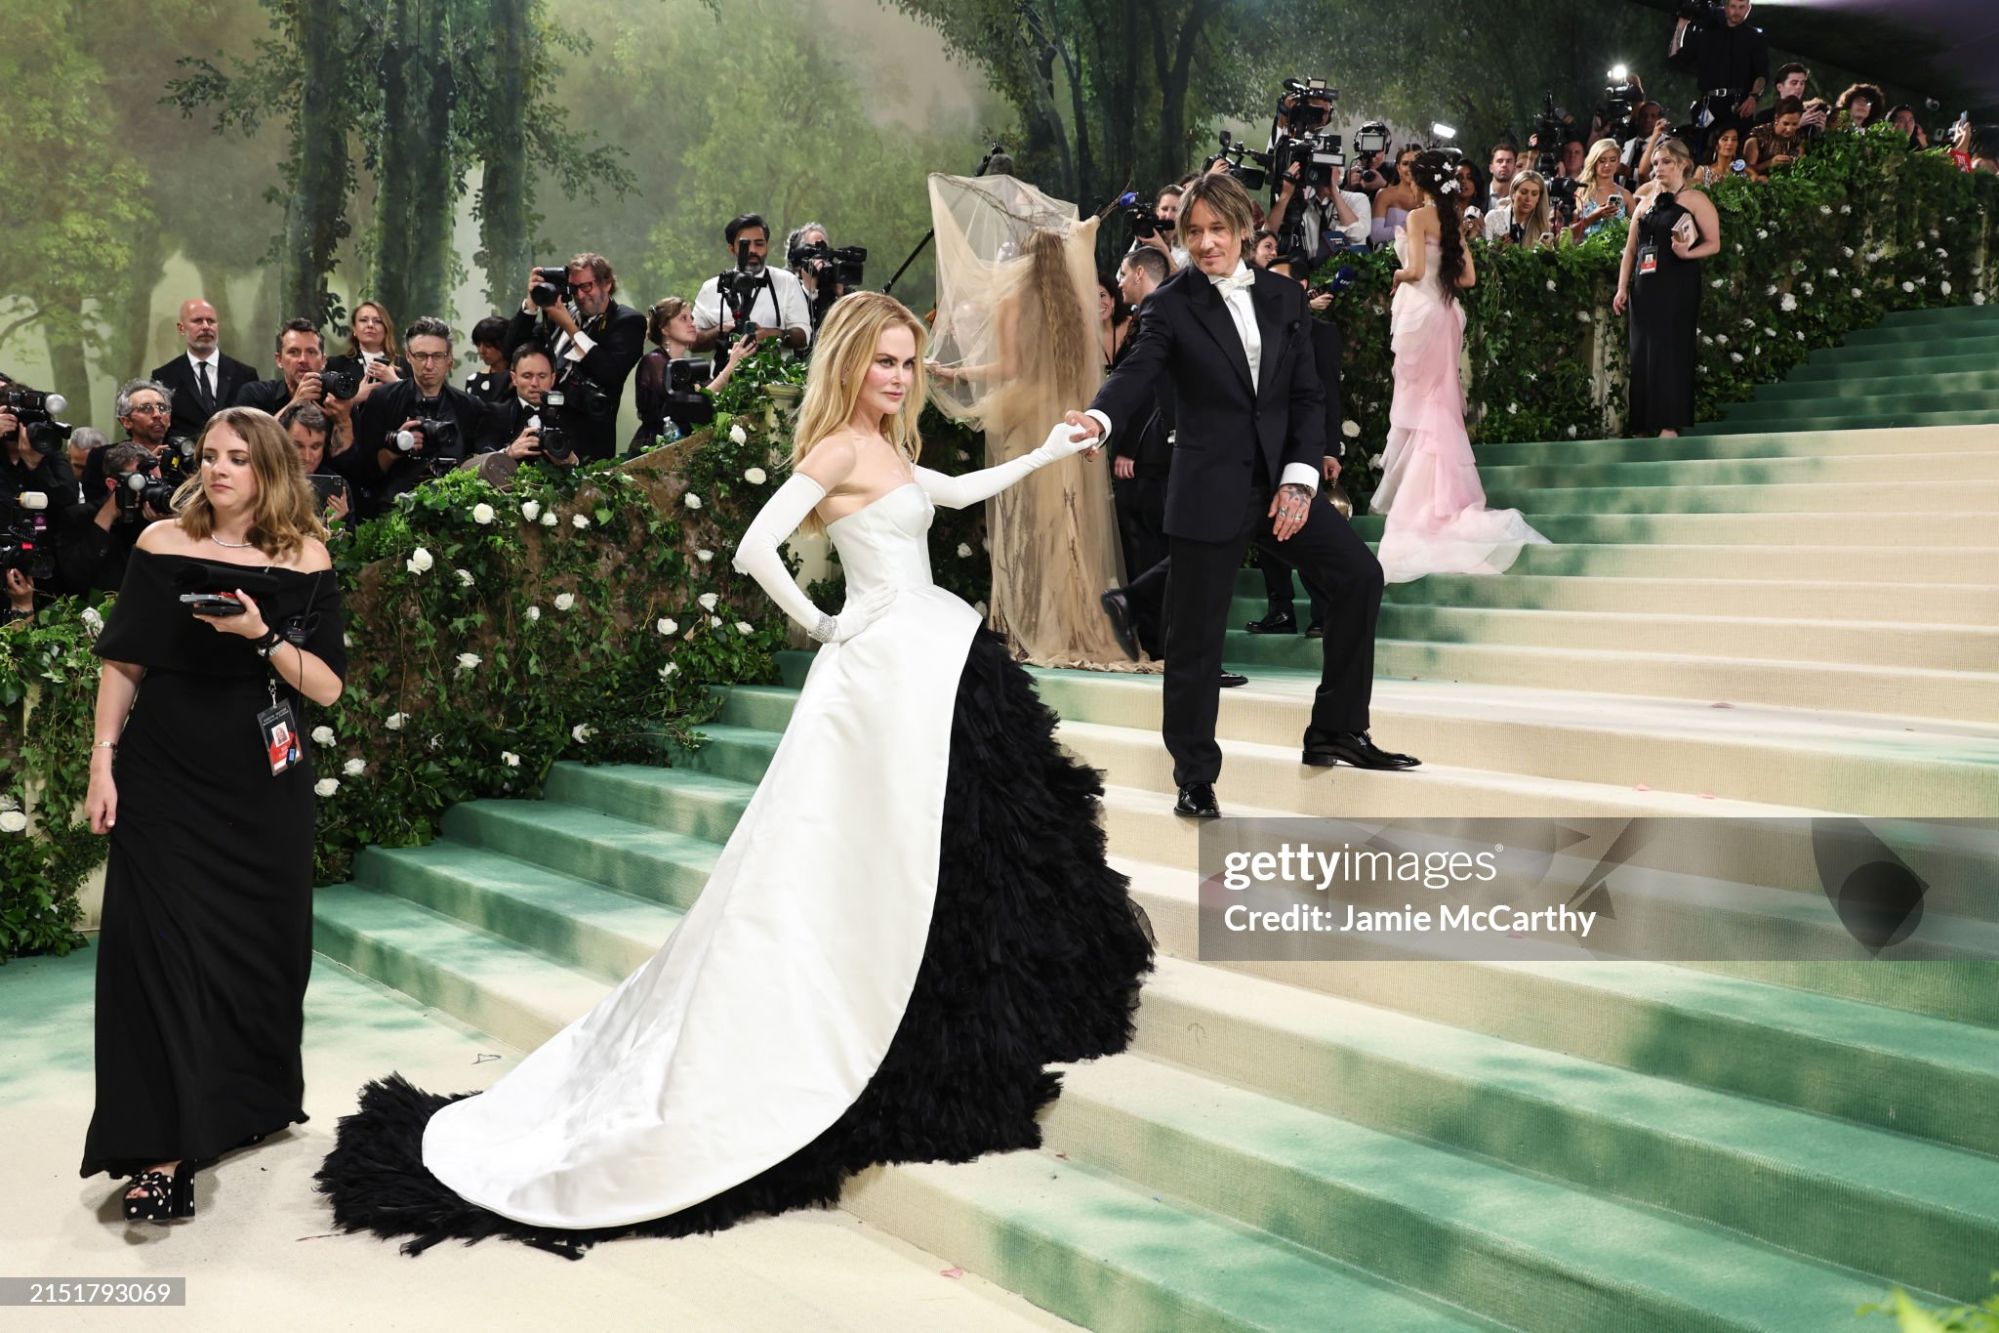 gettyimages-2151793069-2048x2048.jpg